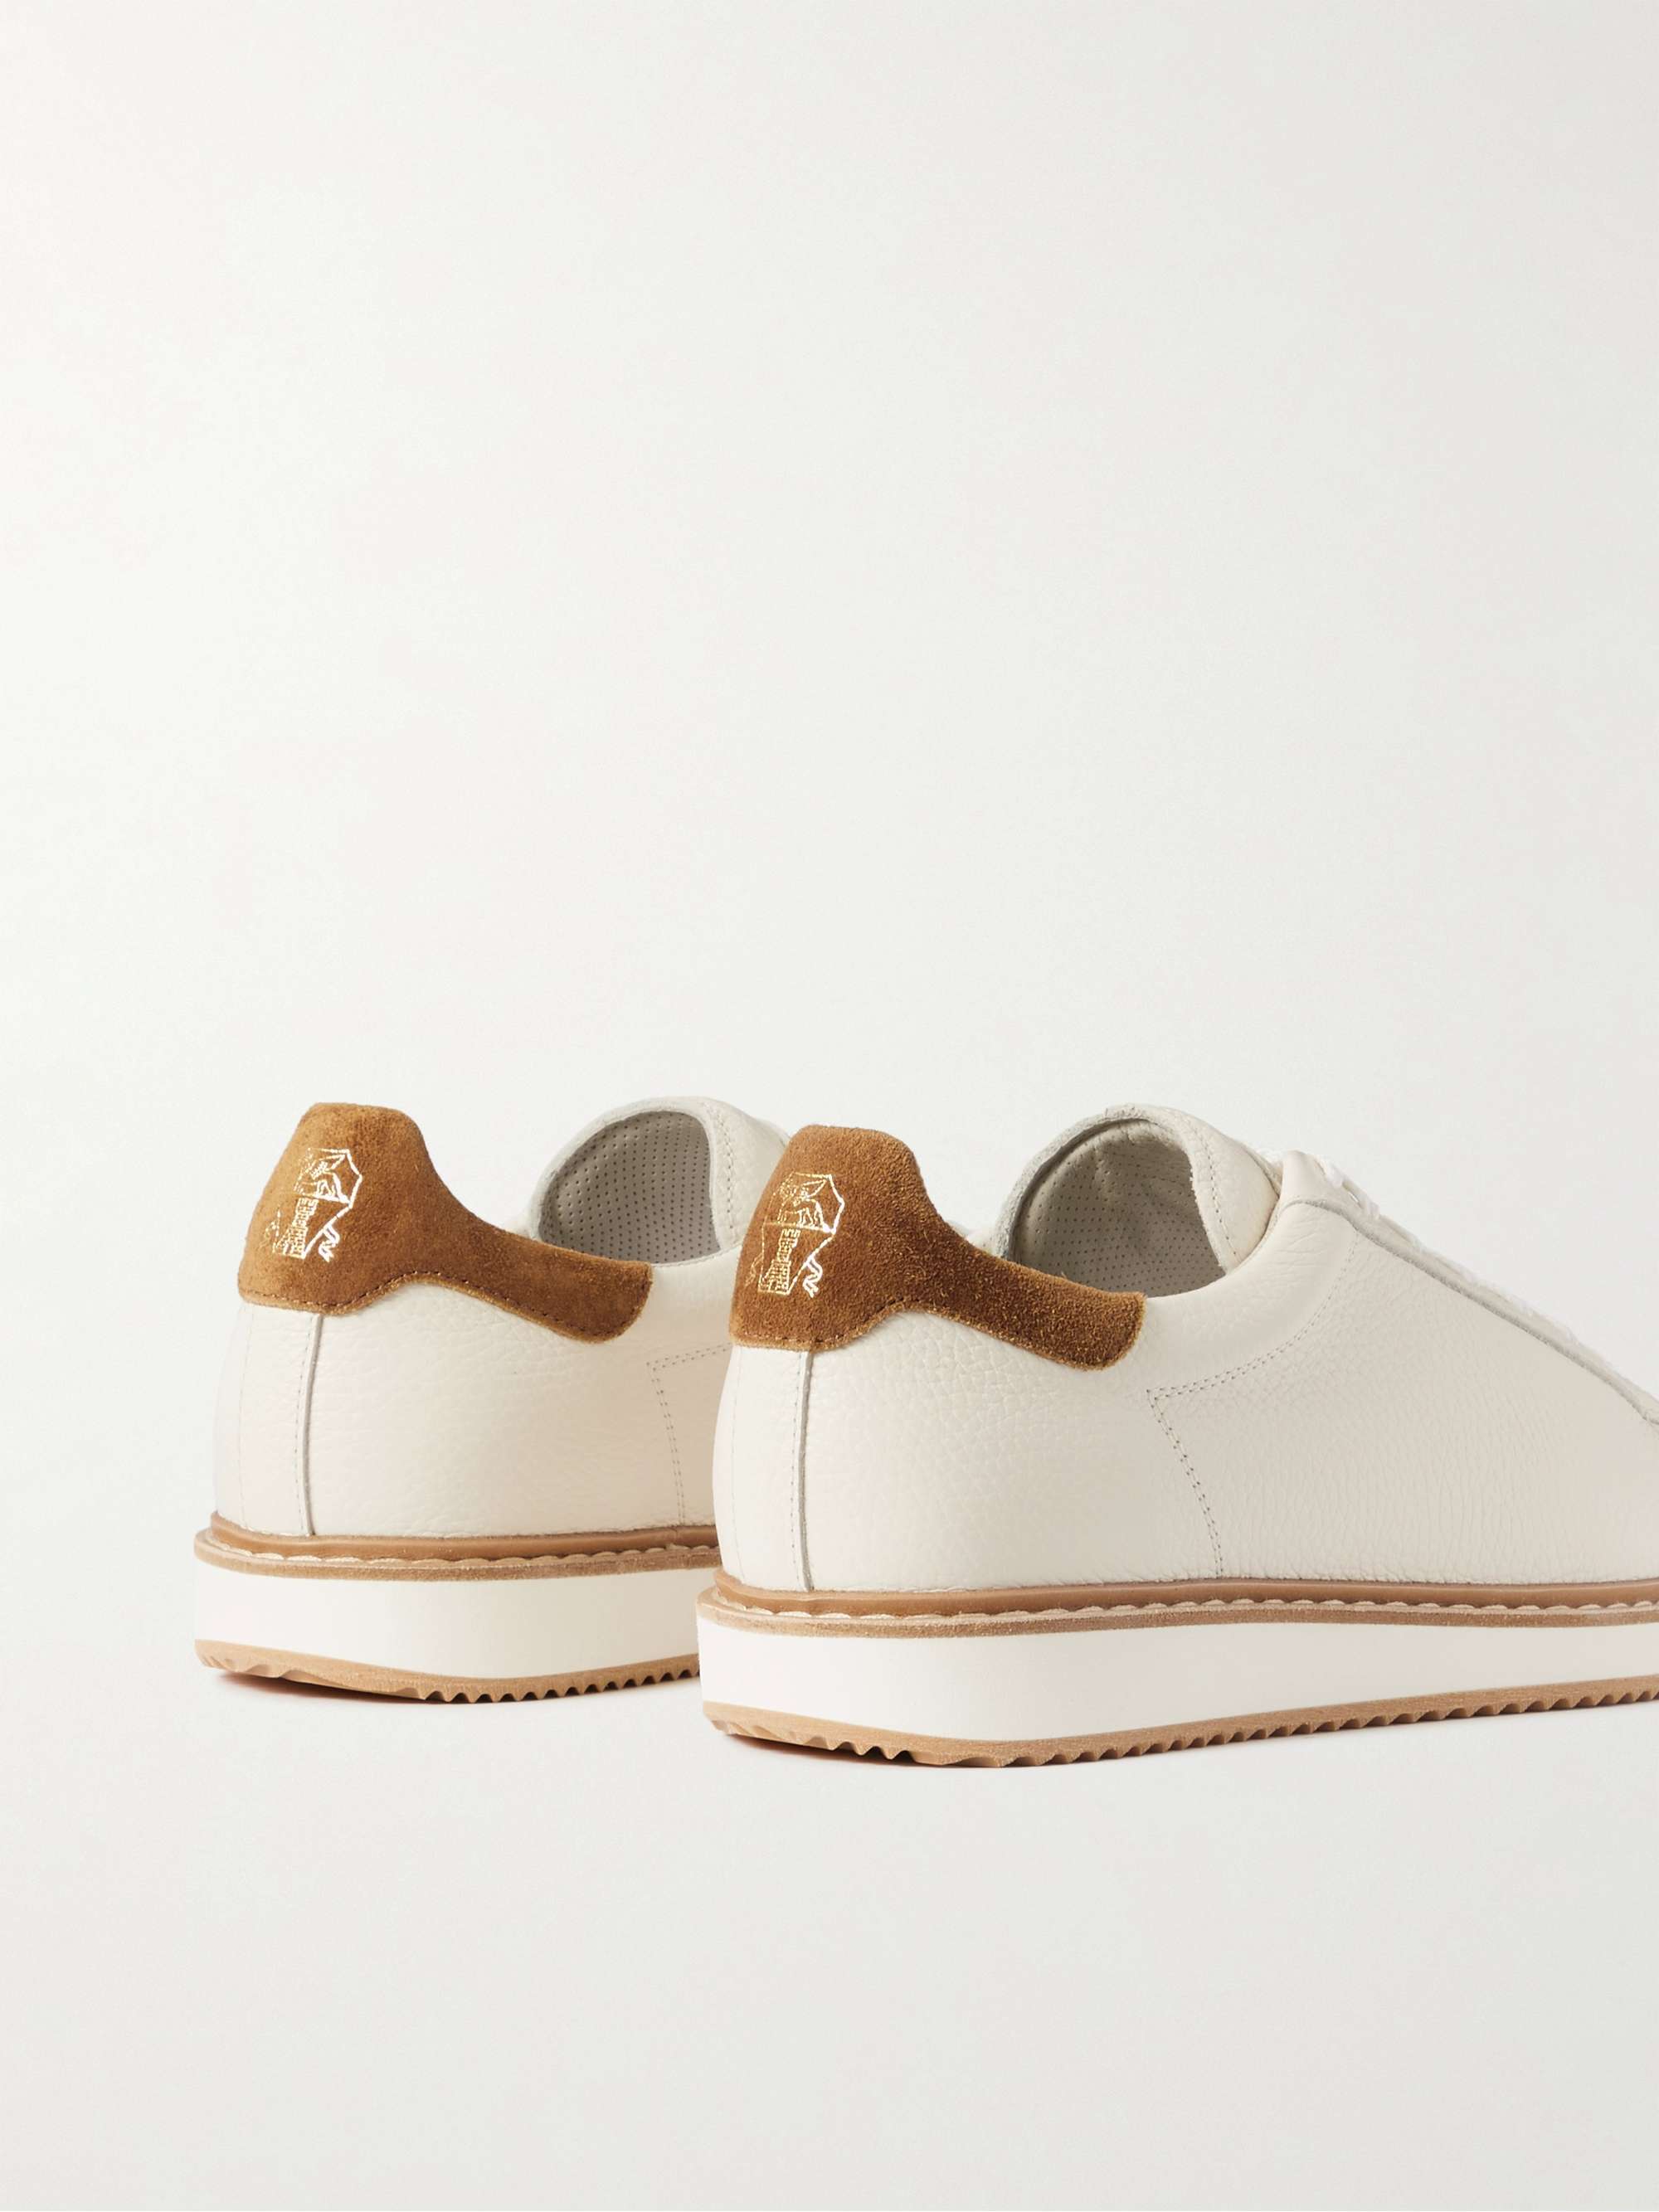 BRUNELLO CUCINELLI Full-Grain Suede-Trimmed Leather Sneakers